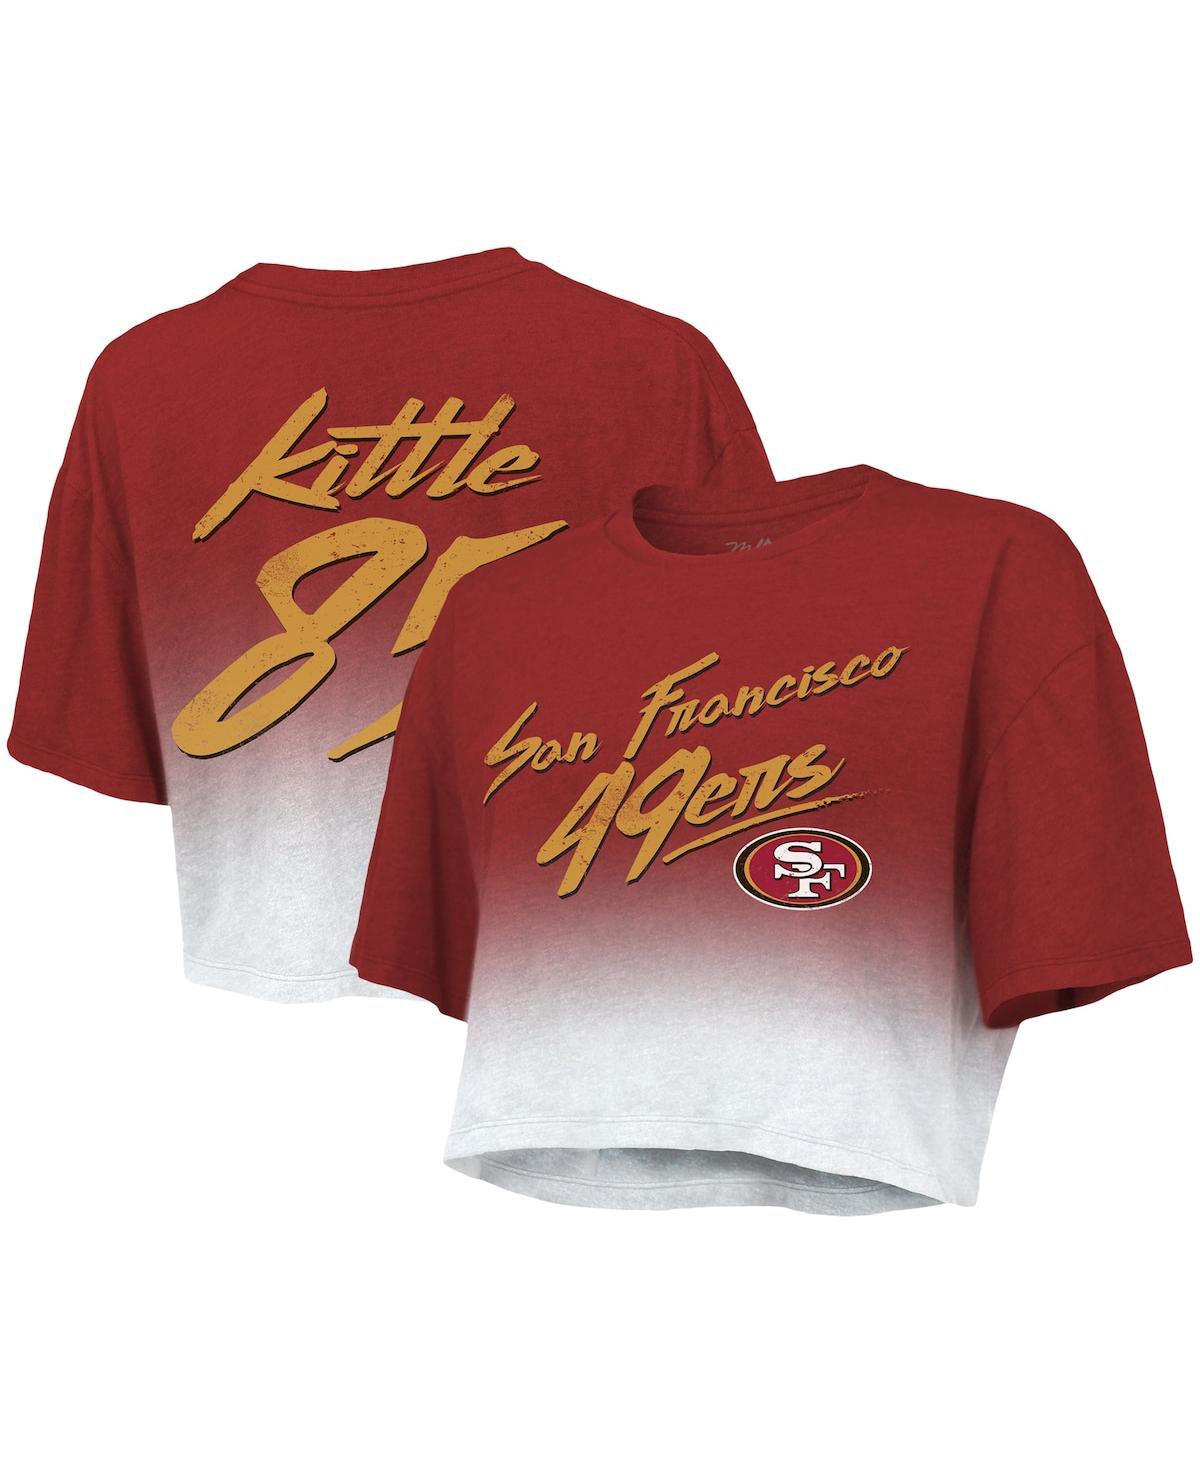 Women's Majestic Threads George Kittle Scarlet, White San Francisco 49ers Drip-Dye Player Name and Number Tri-Blend Crop T-shirt - Scarlet, White